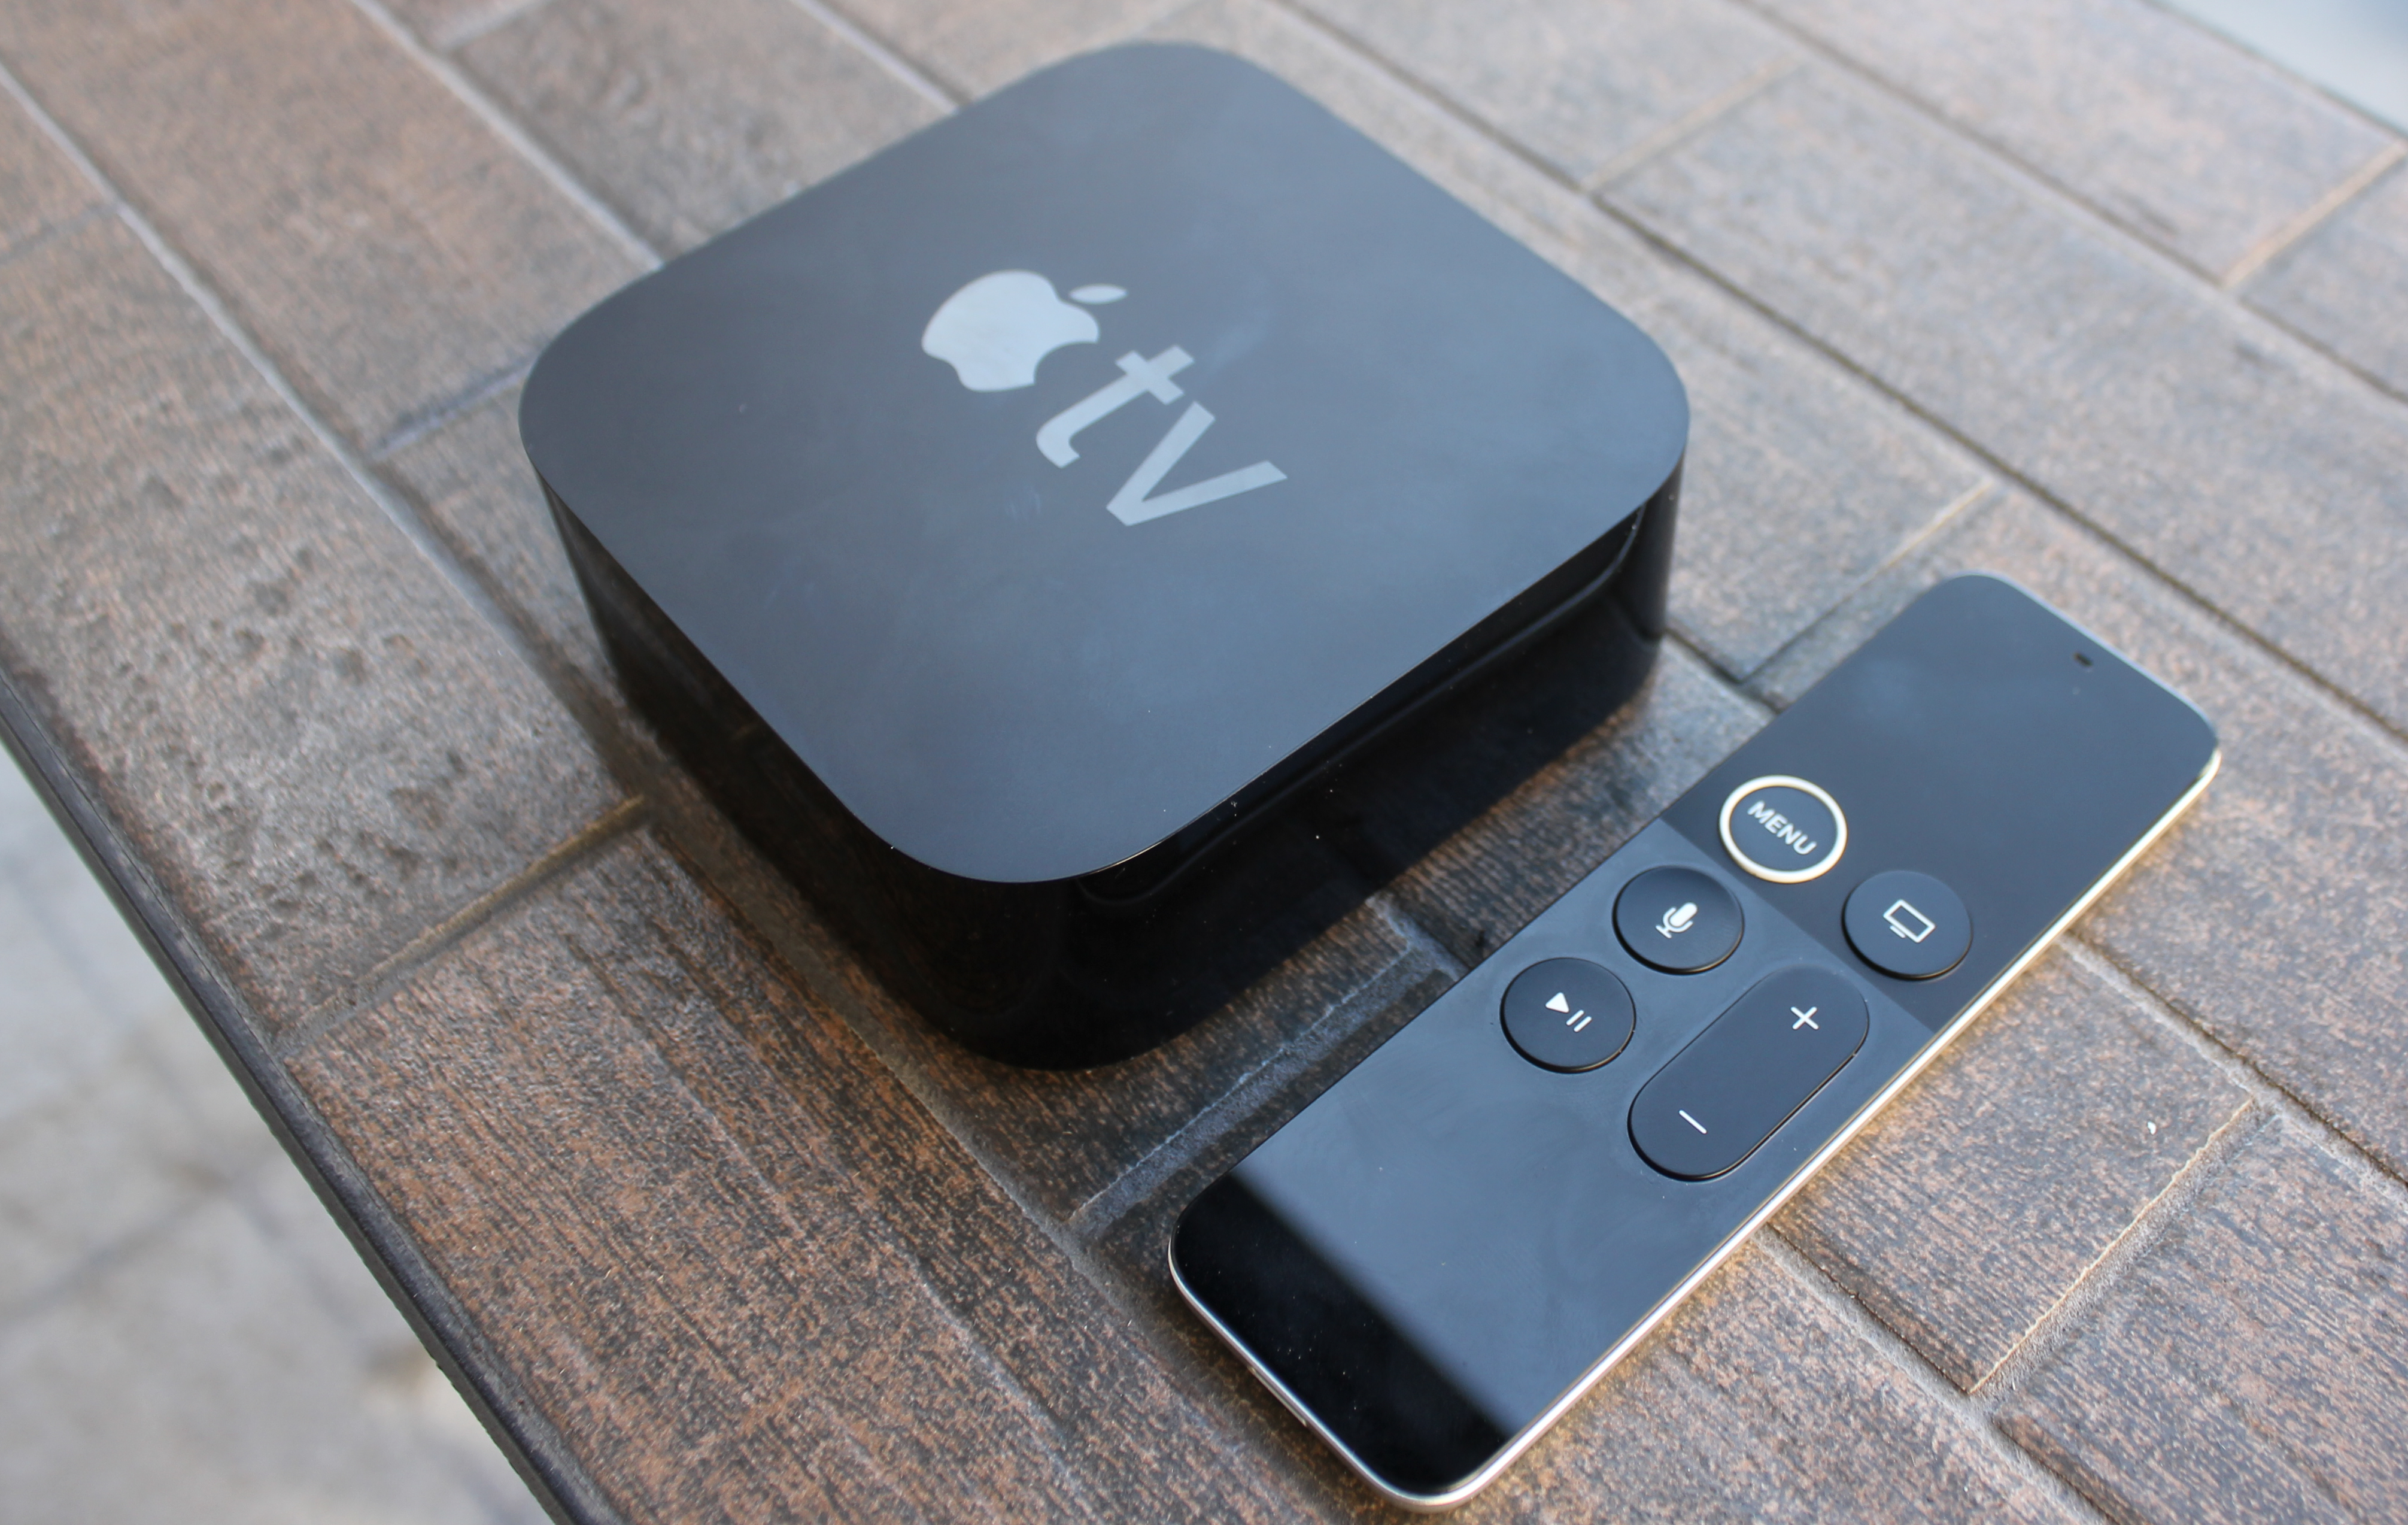 Amazon Video finally arrives on Apple TV, months after original announcement Ars Technica